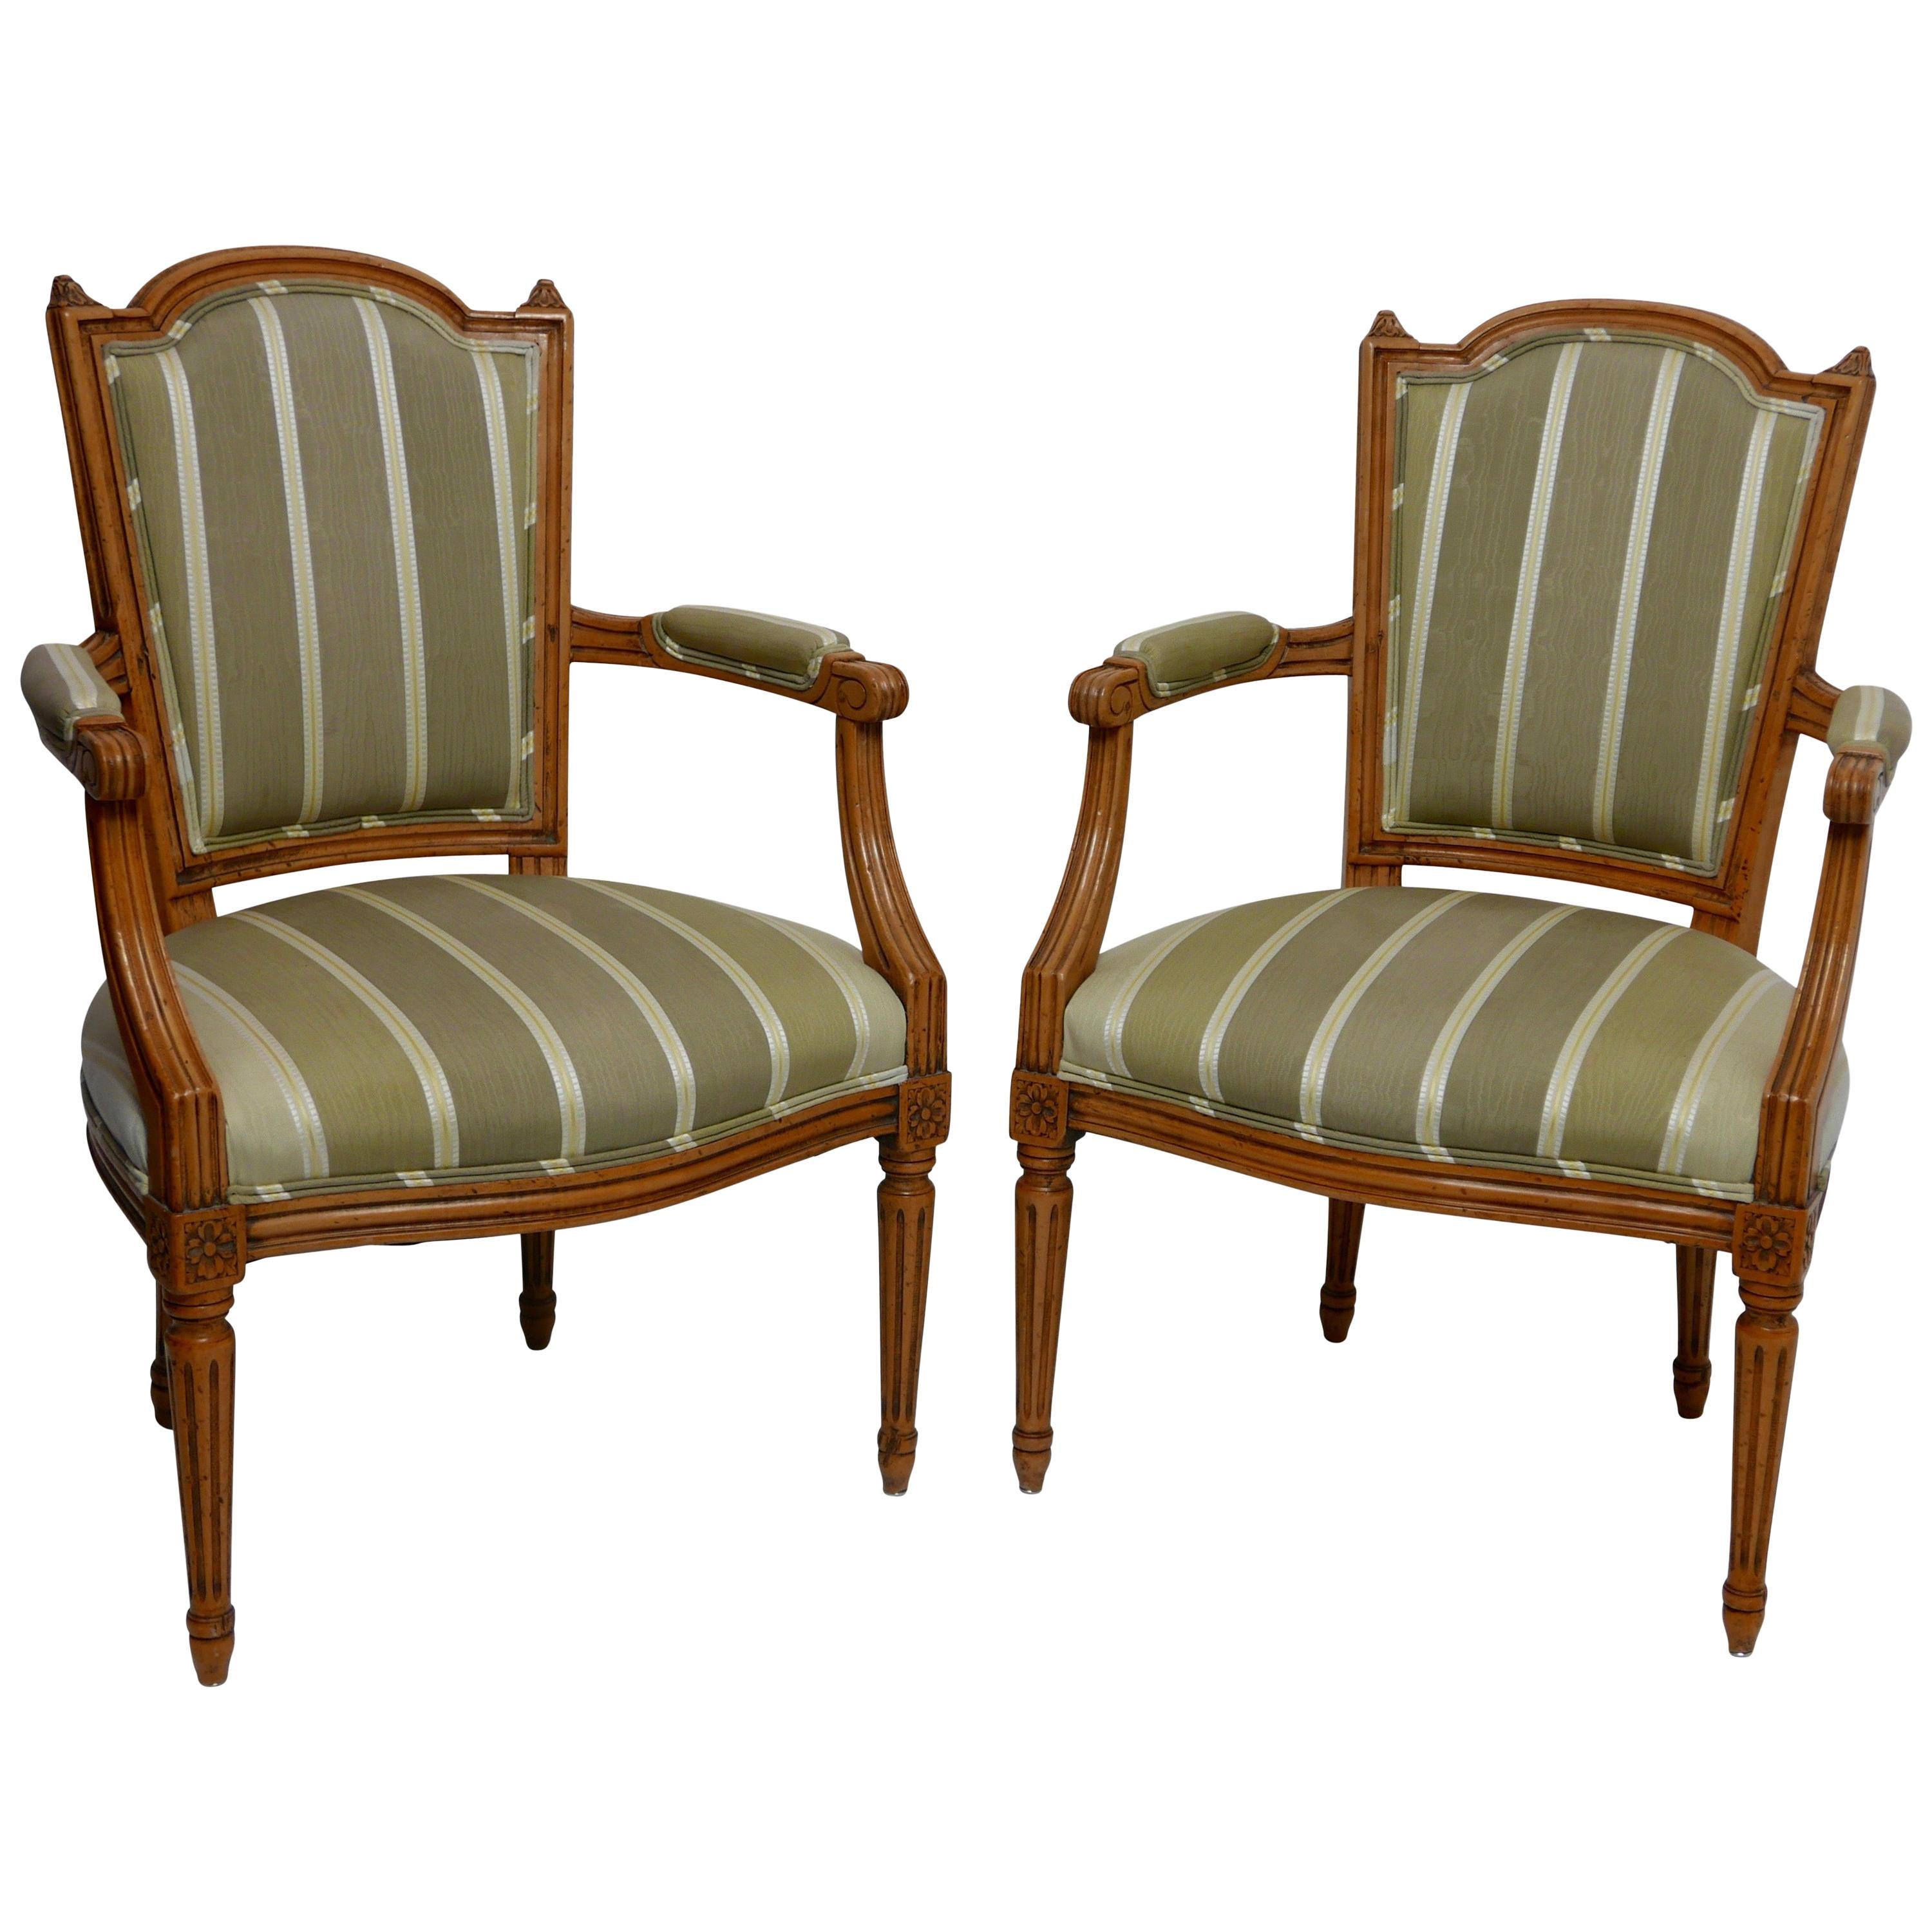 Pair of Louis XVI Fauteuils Armchairs with Carved Frames, French, circa 1800